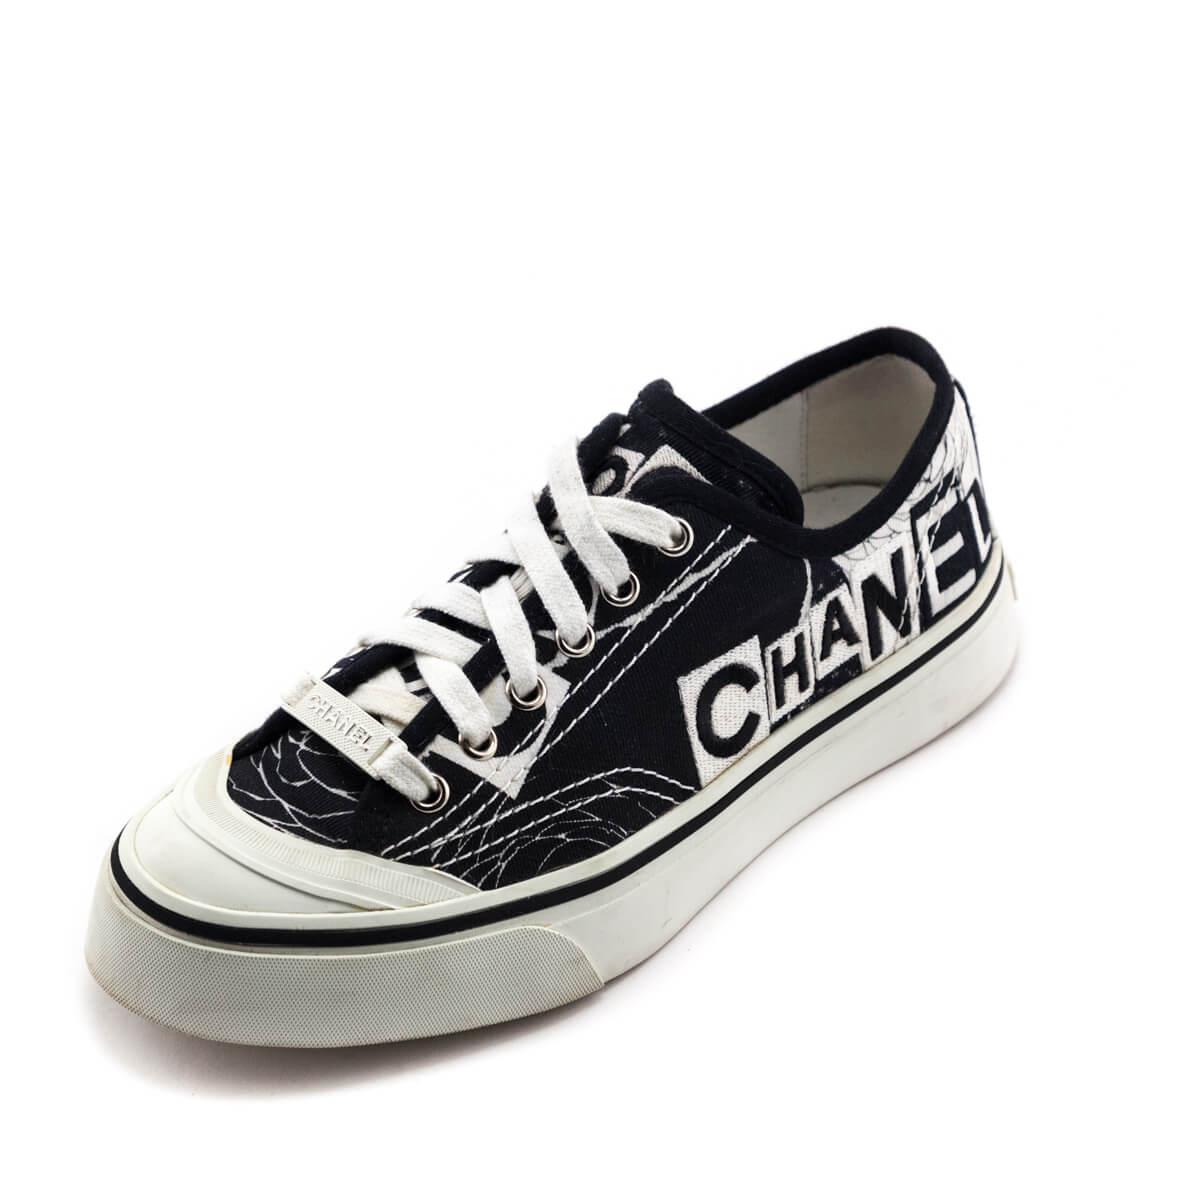 Chanel White Sneakers - LVLENKA Luxury Consignment